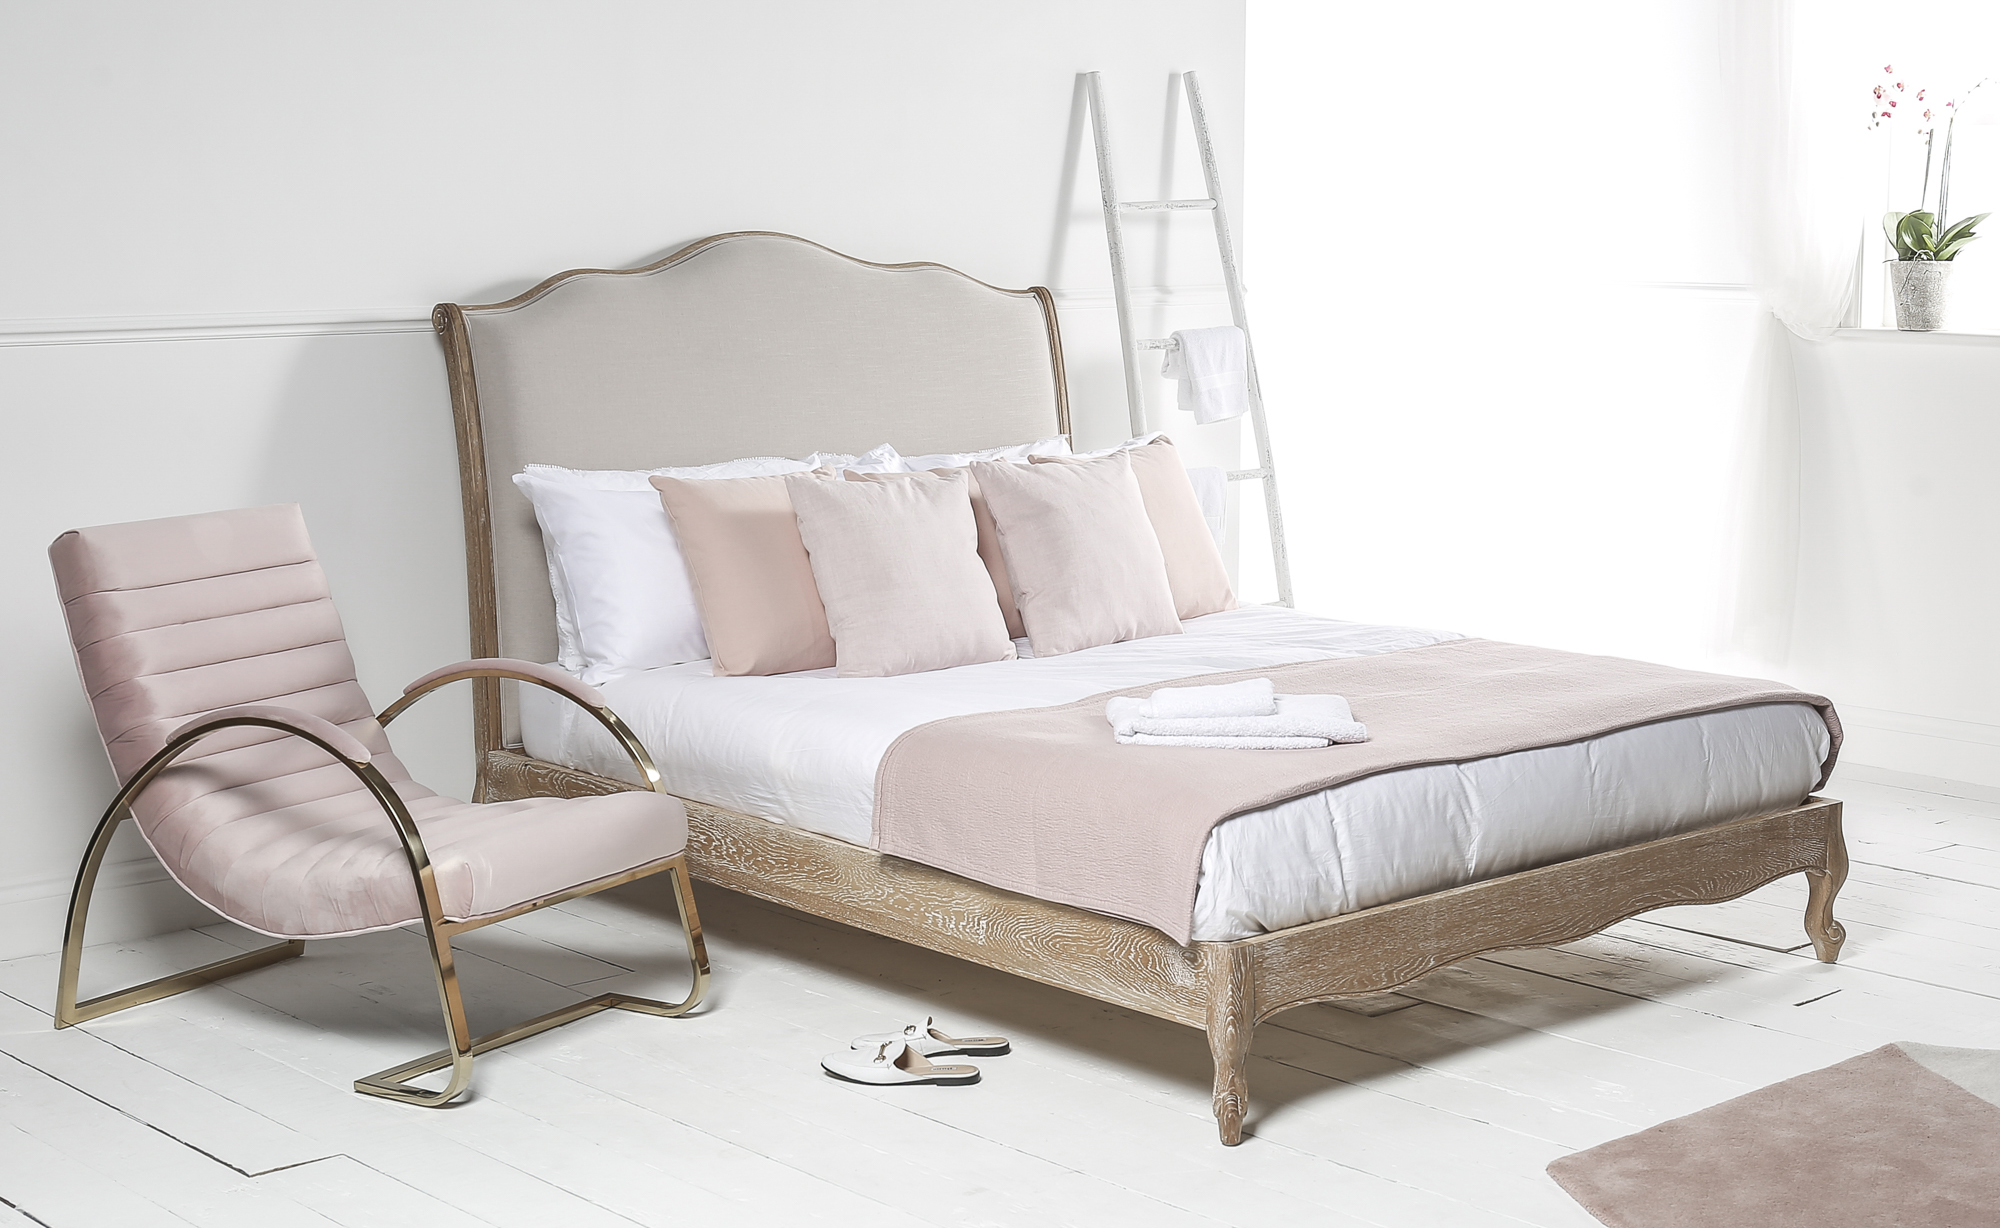 Q&As: What is the Bench at the End of a Bed Called?